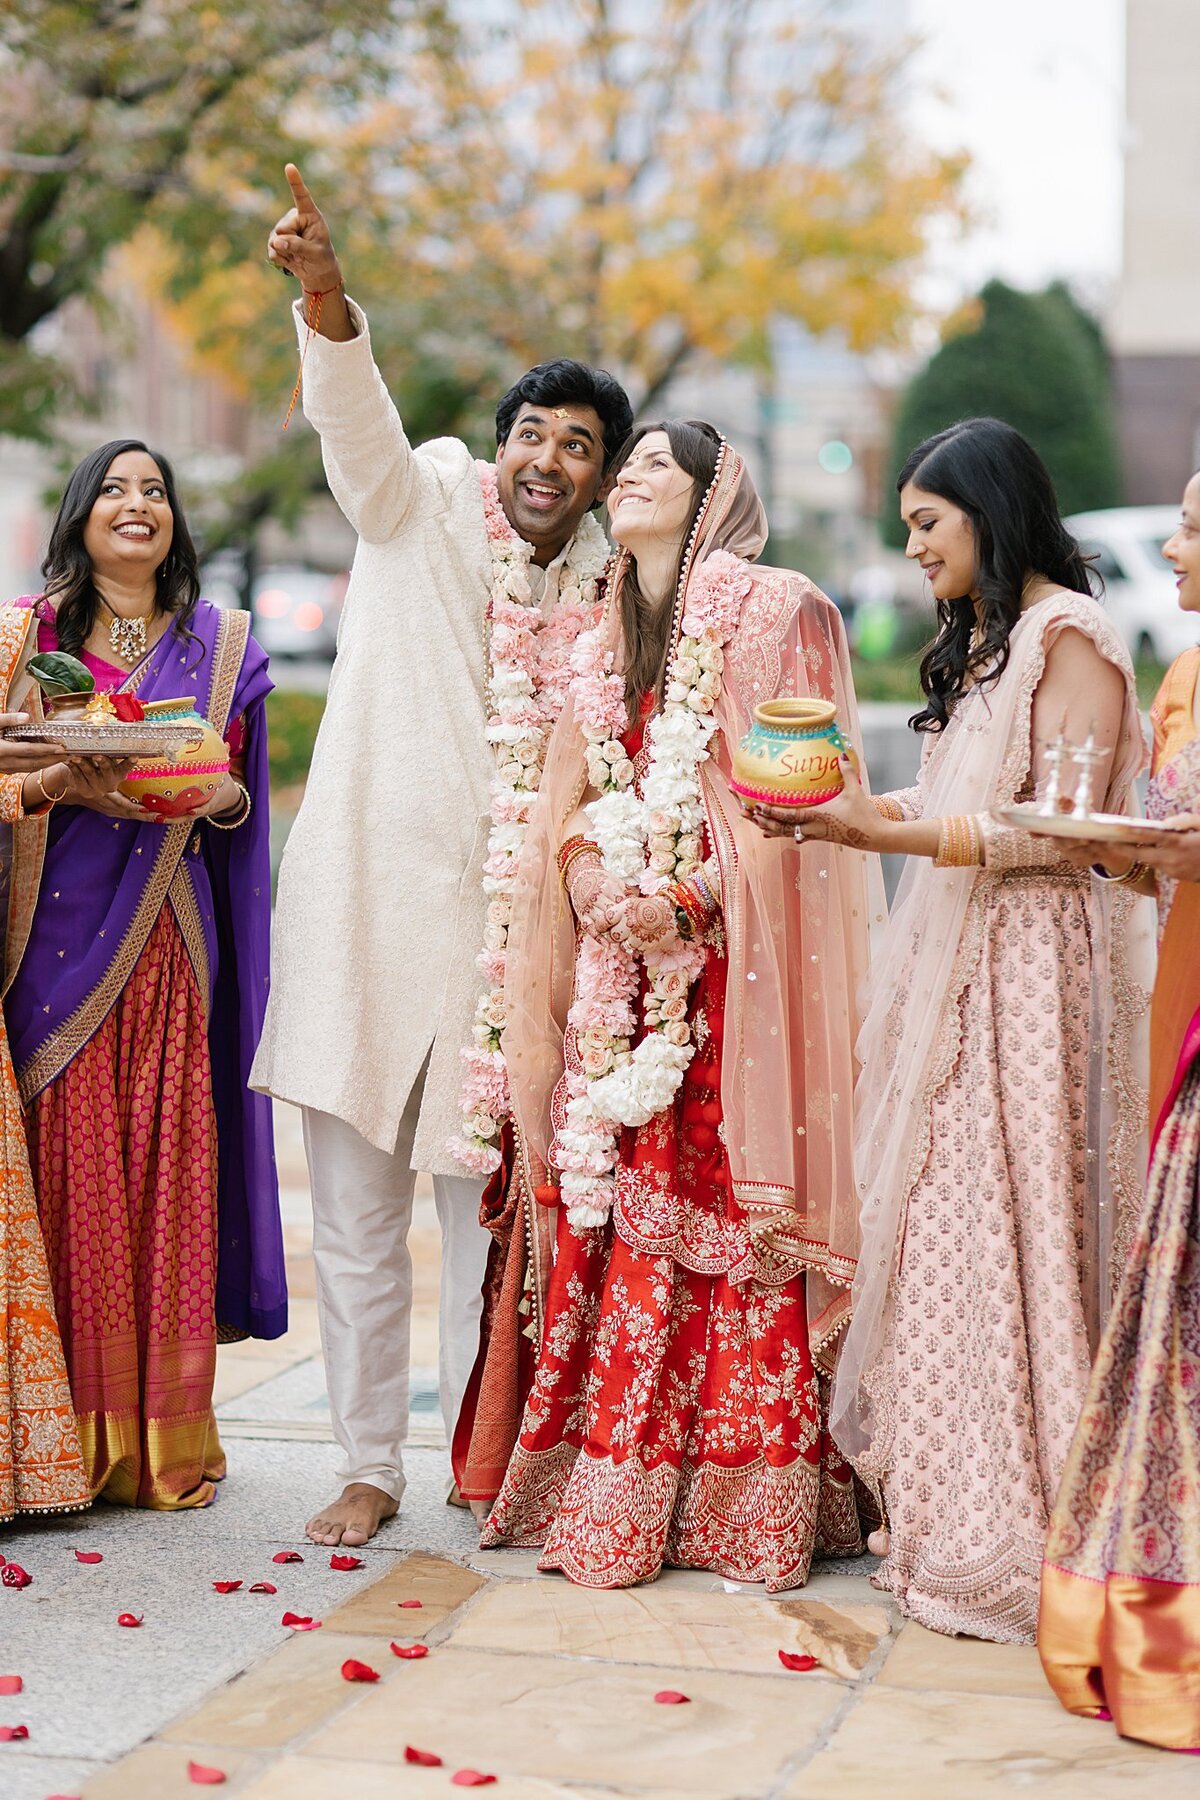 Indian groom wearing a white sherwani and blush floral varmala points to the sky as an Indian bride wearing a red and gold saree wearing a blush floral varmala looks up. Indian wedding guests holding offerings to the gods surround them at there Hindu wedding in Nashville, TN